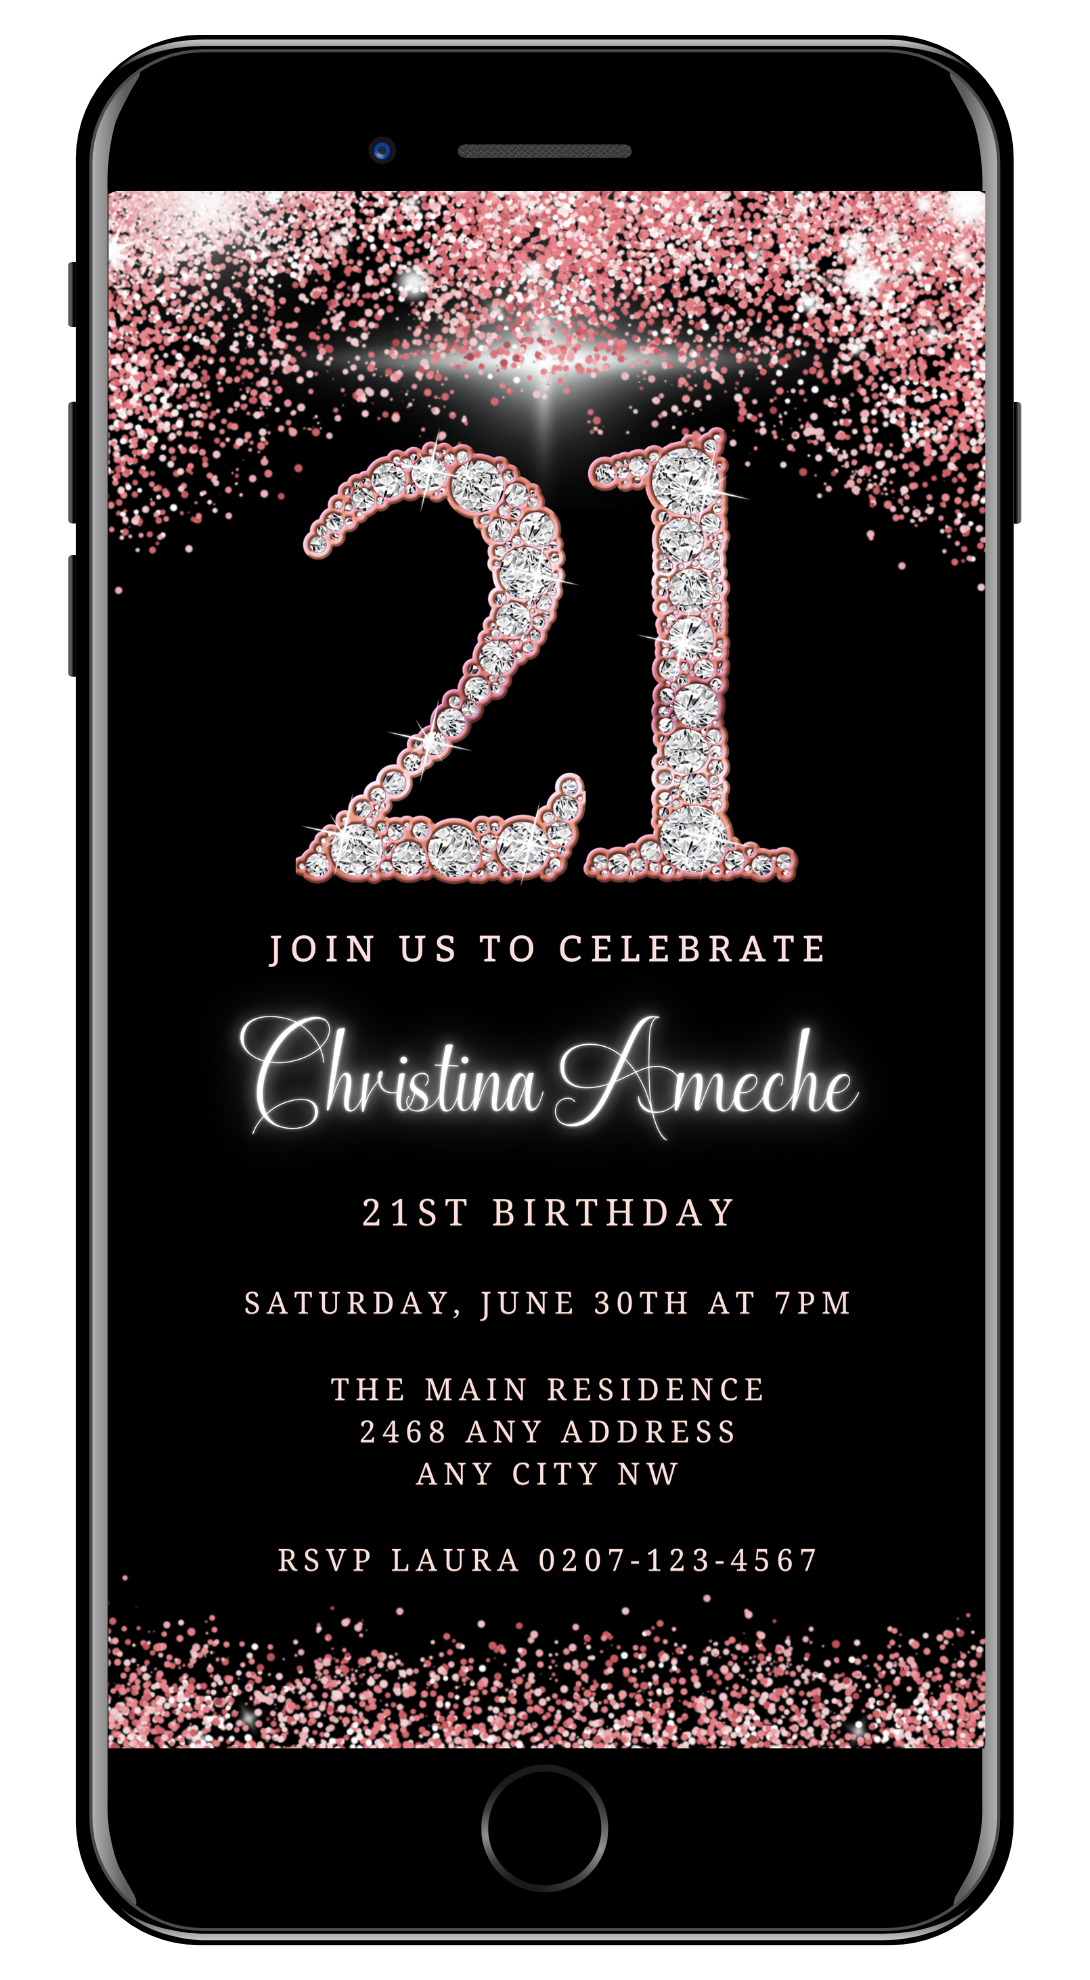 Rose Gold Glitter Diamond 21st Birthday Evite displayed on a smartphone screen, showcasing customizable text and design elements for a personalized digital invitation.